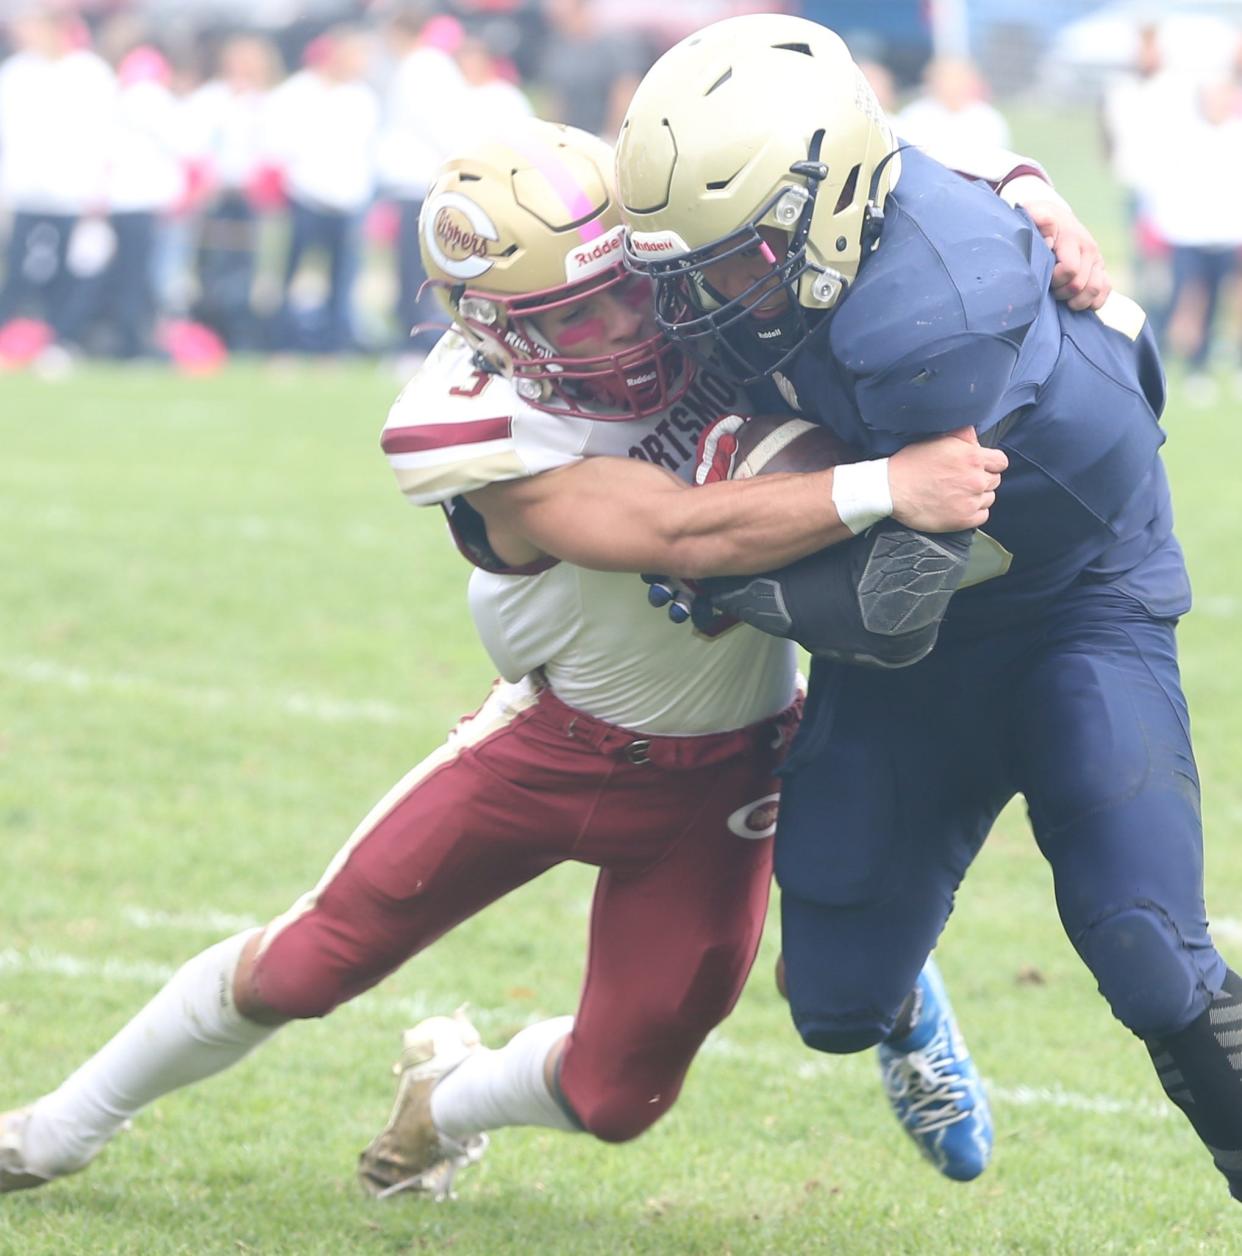 Portsmouth High School's Dom Buono (3) had 11 tackles and an interception in the regular-season win over Windham.